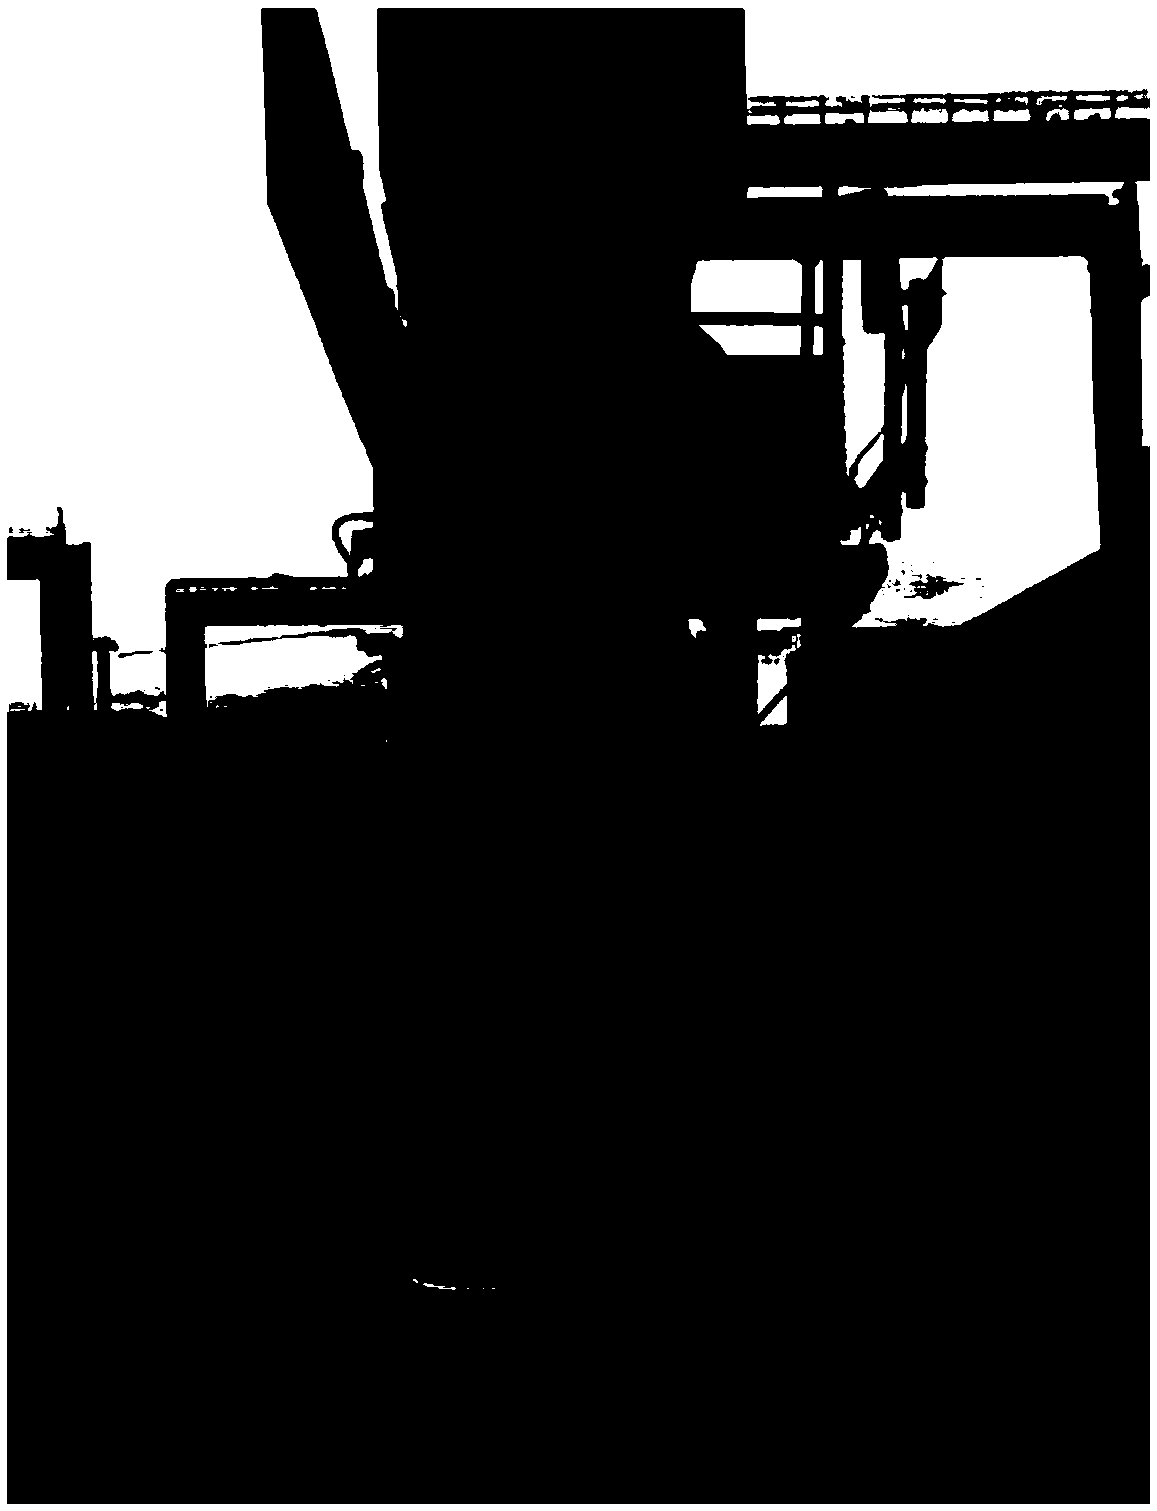 Method for detecting obstacle of rubber tired crane at container port based on binocular vision